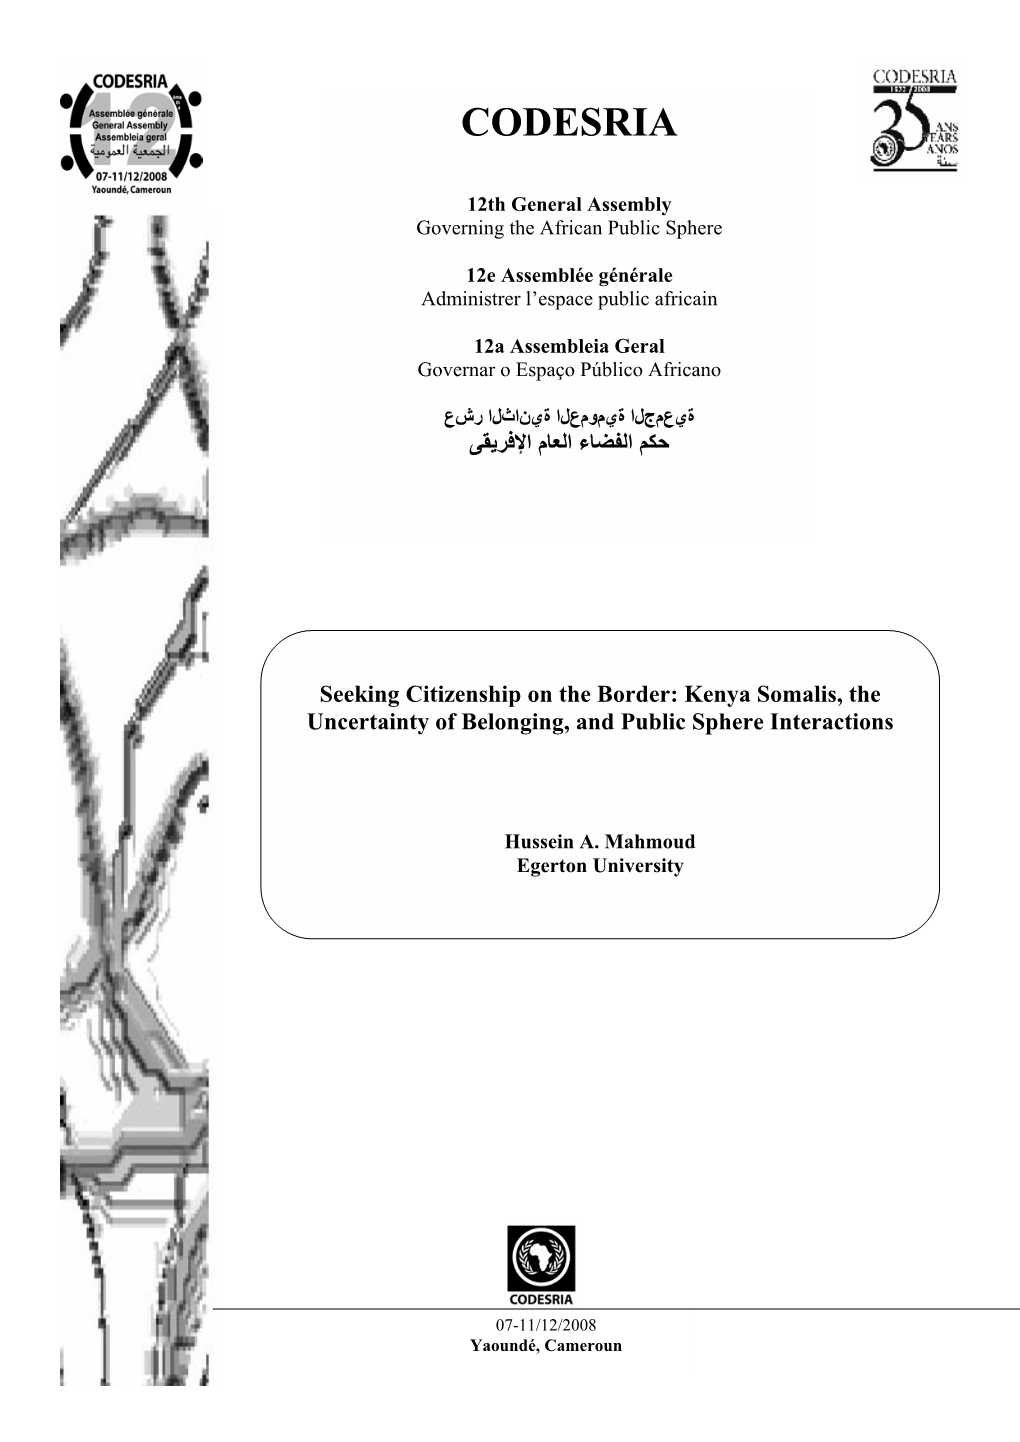 Seeking Citizenship on the Border: Kenya Somalis, the Uncertainty of Belonging, and Public Sphere Interactions